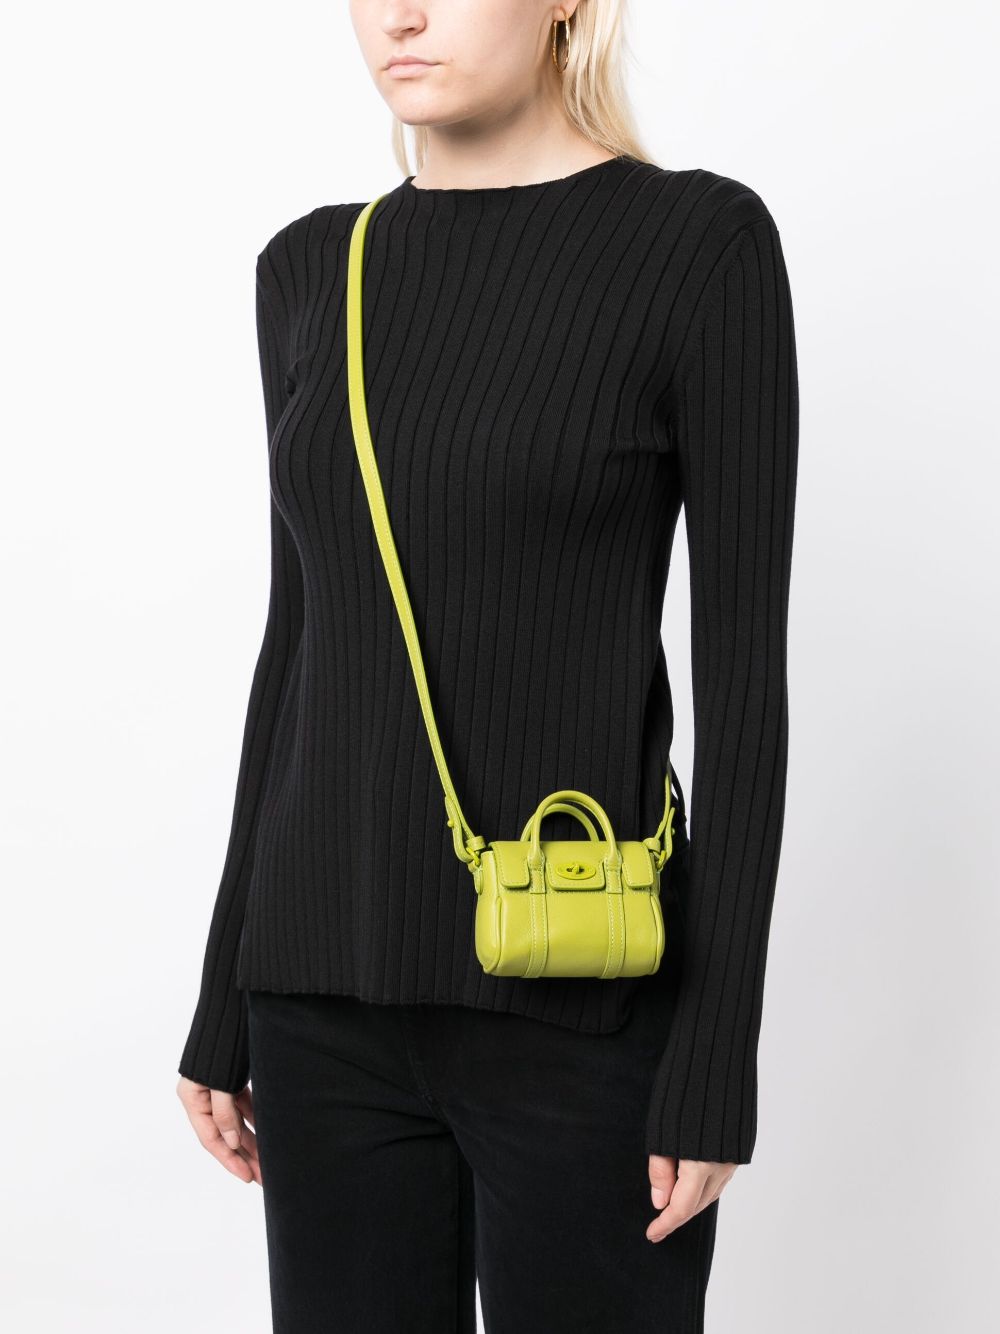 Mulberry Micro Bayswater Shoulder Bag - Farfetch